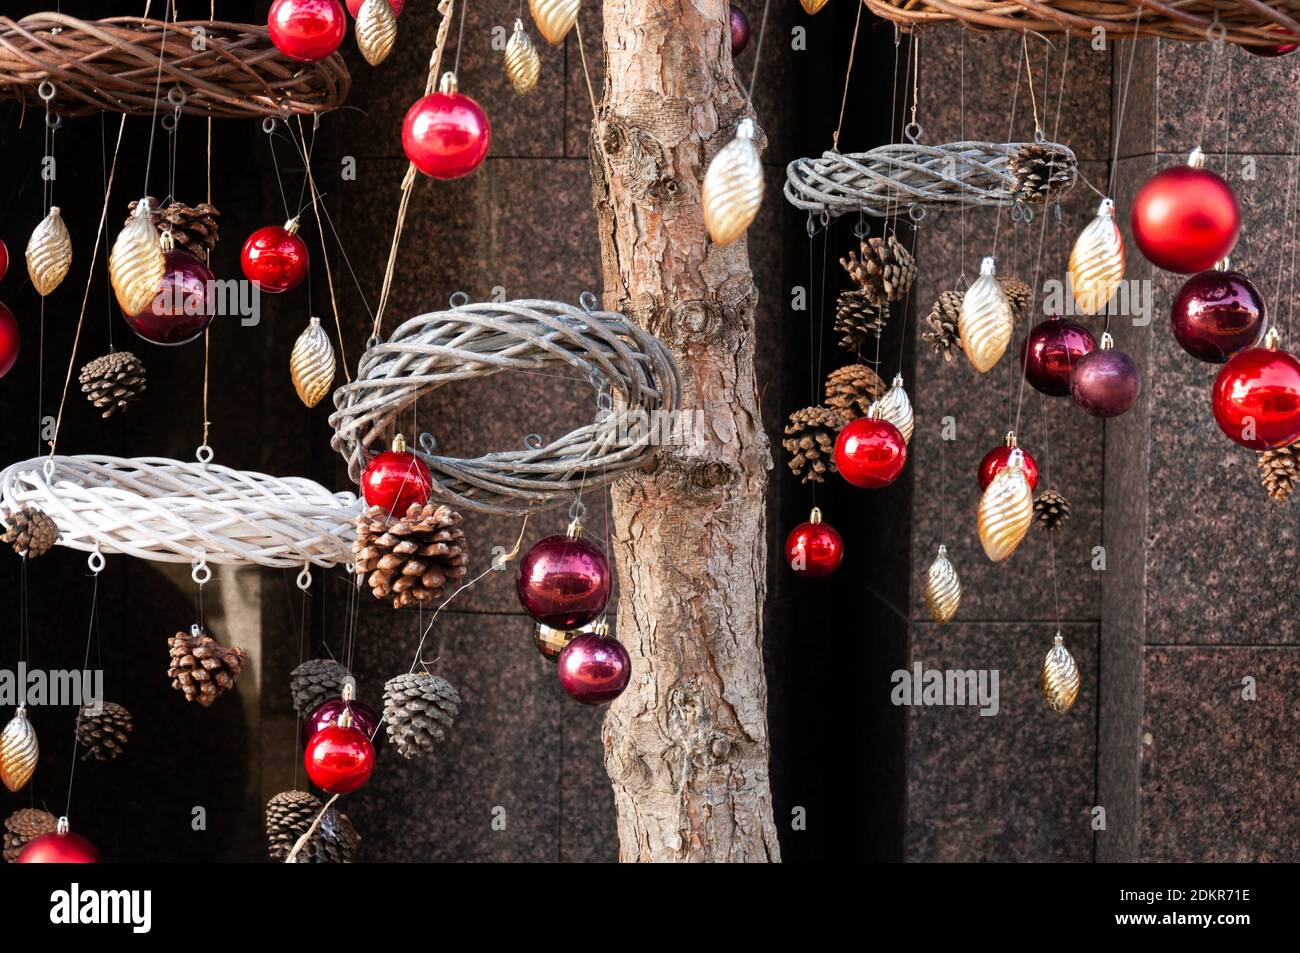 Christmas Baubles Balls and wreath hanging on pine tree branches outside Stock Photo